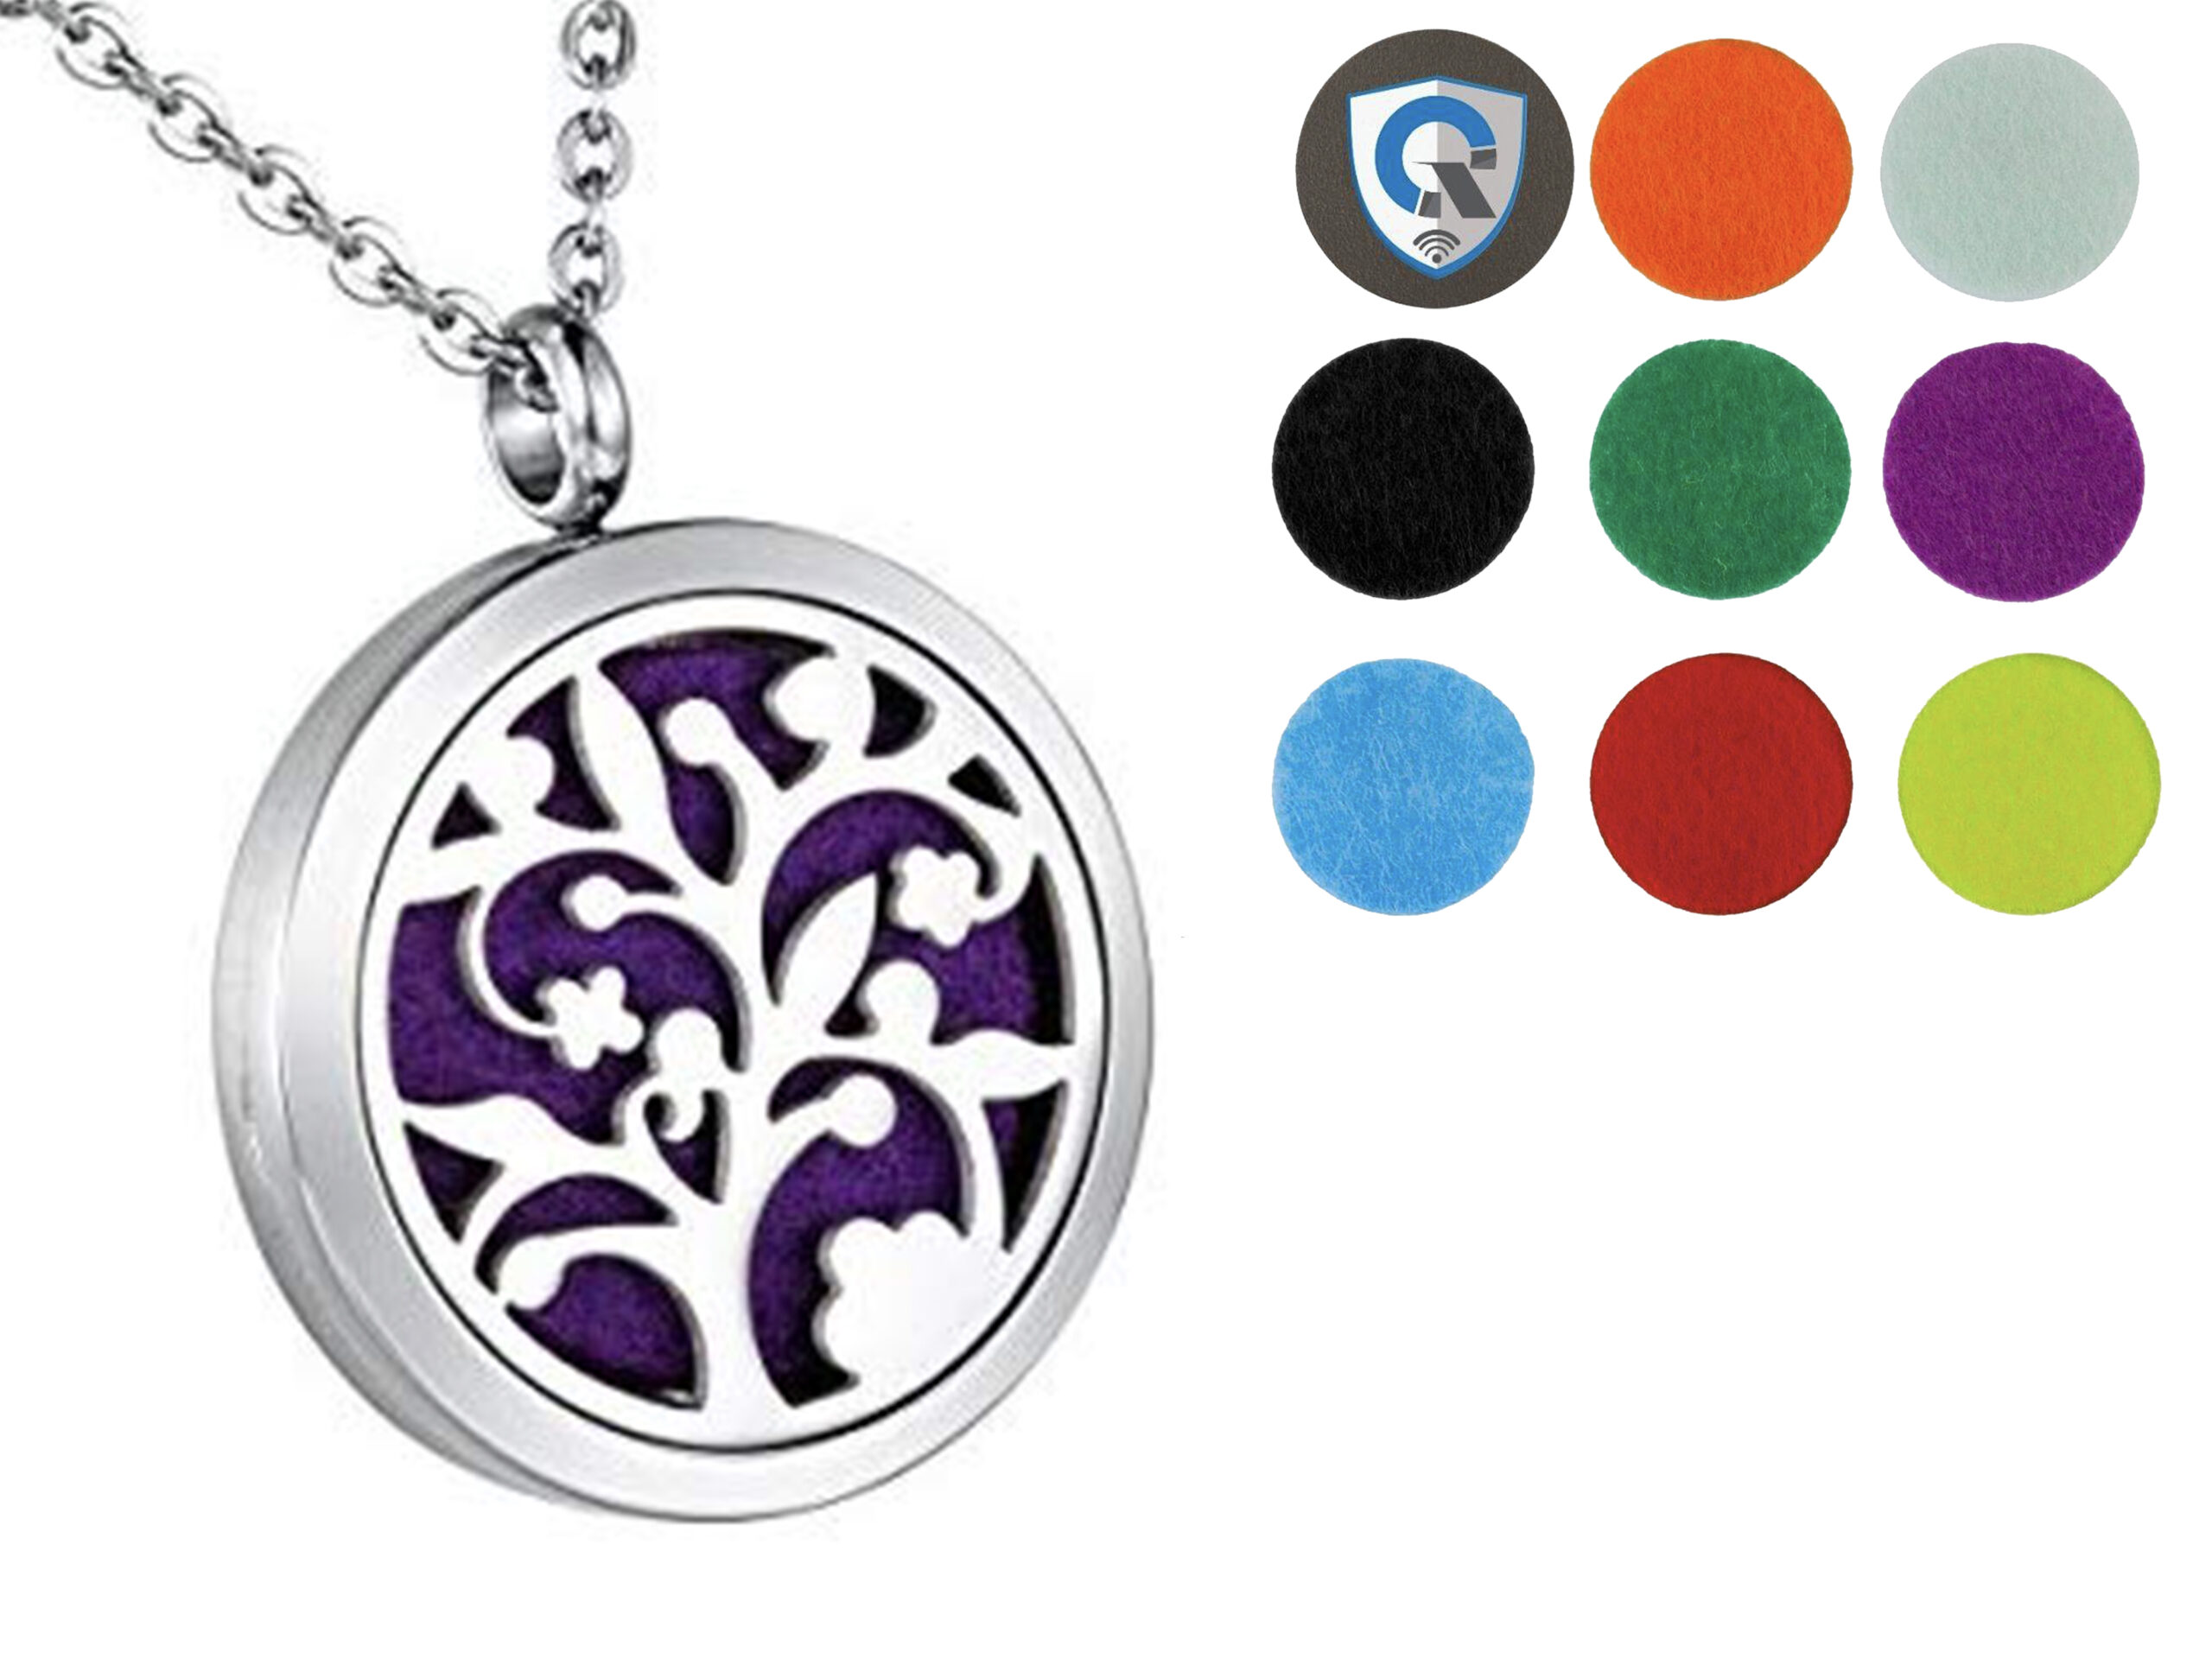 EMF Protection Necklace with Aromatherapy Essential Oil Diffuser- (2 in 1)